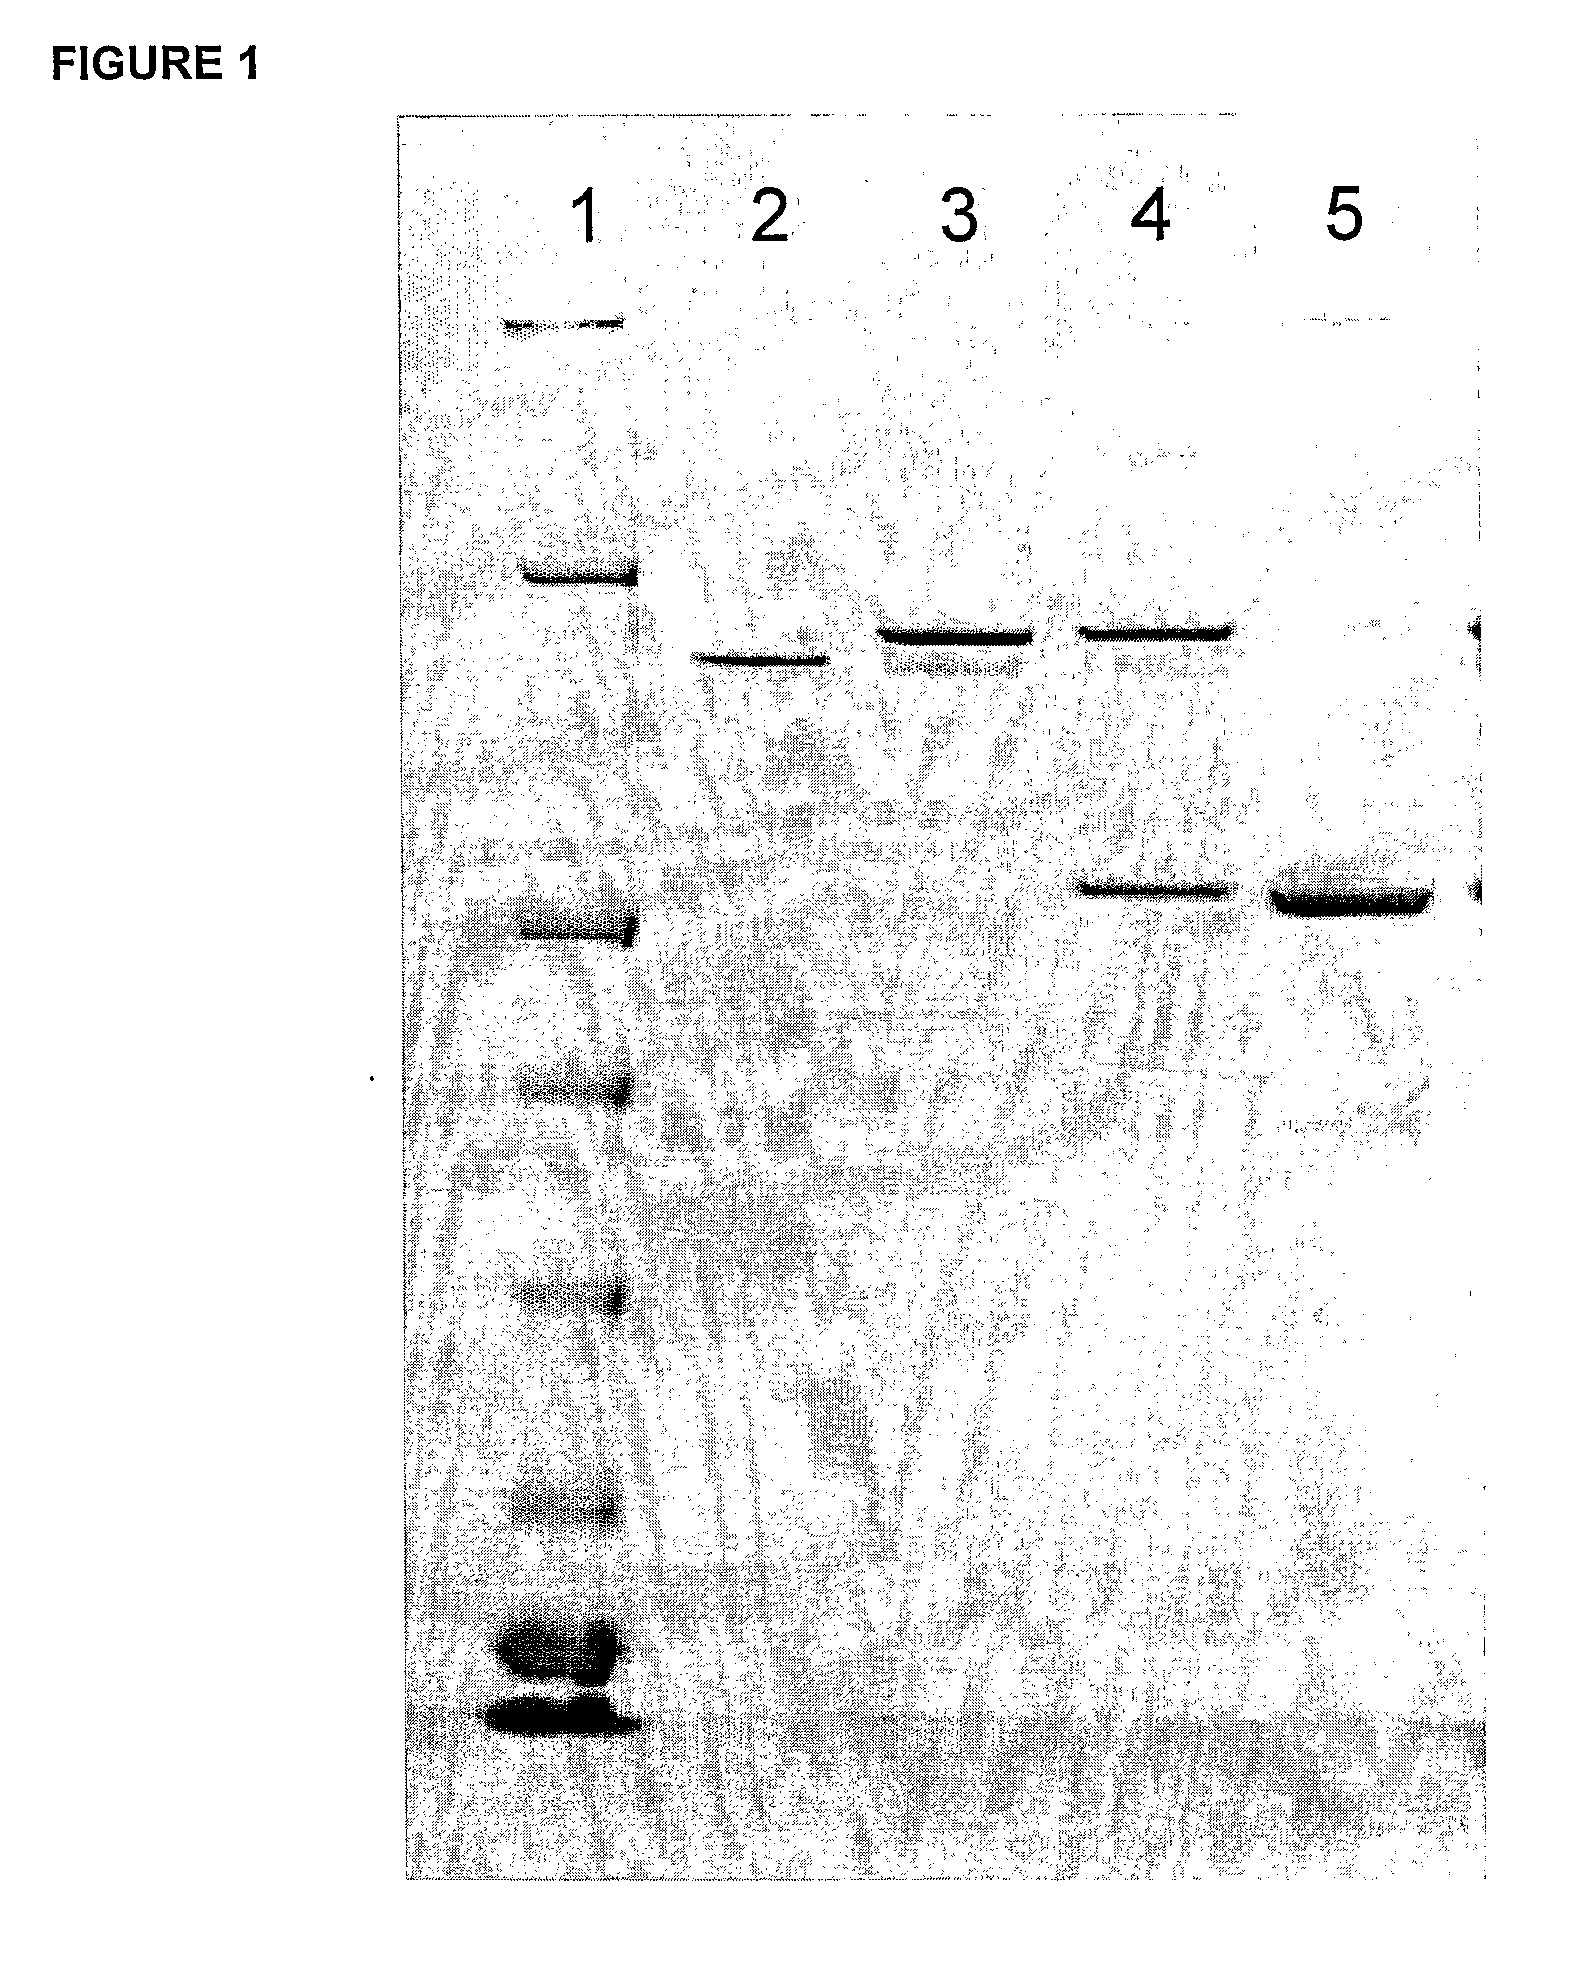 Recombinant monovalent antibodies and methods for production thereof